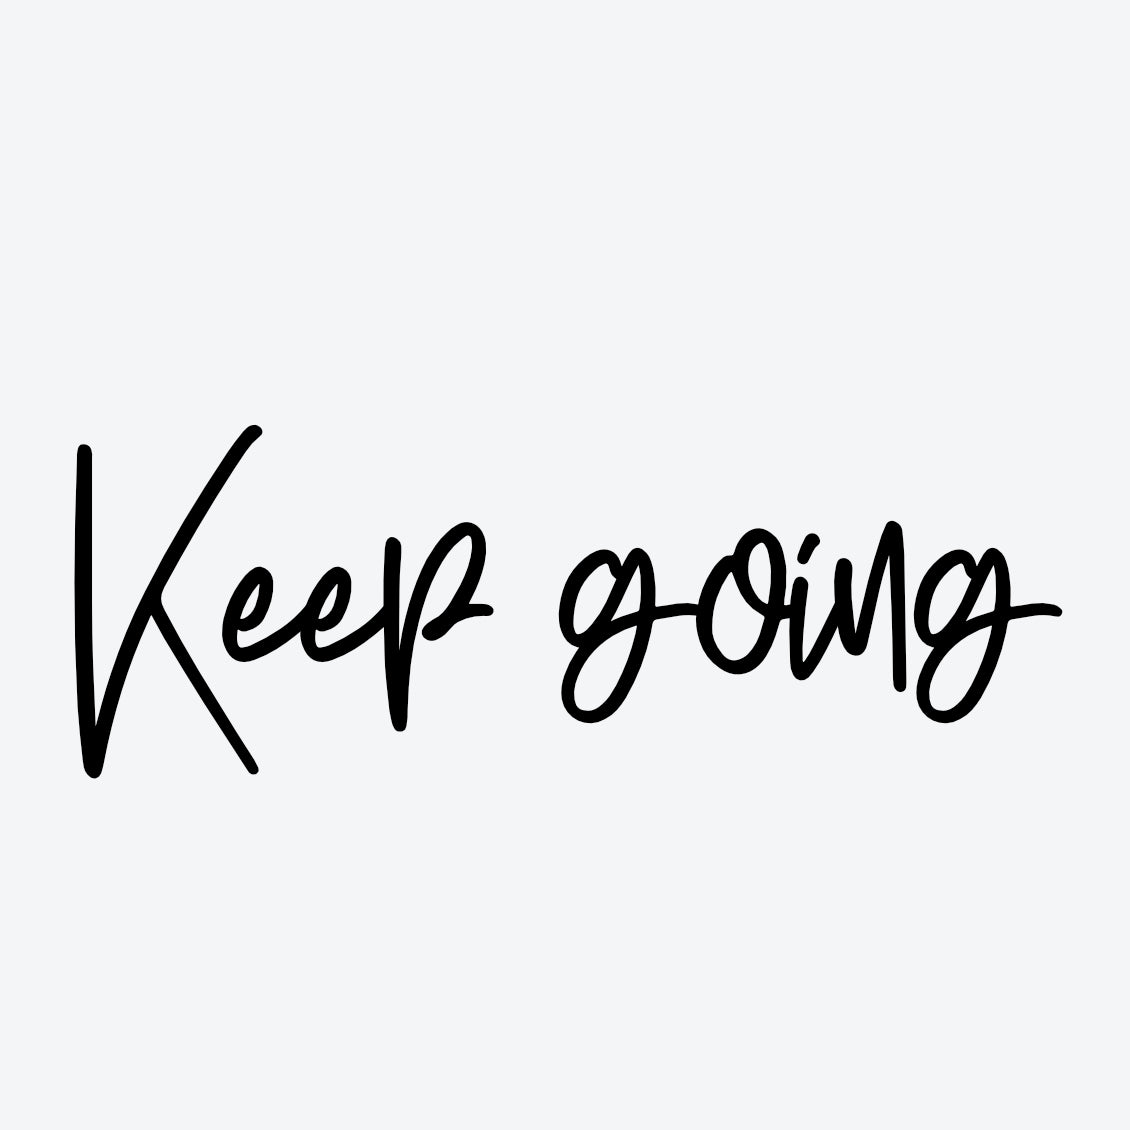 Keep going' temporary tattoo, get it here ▻